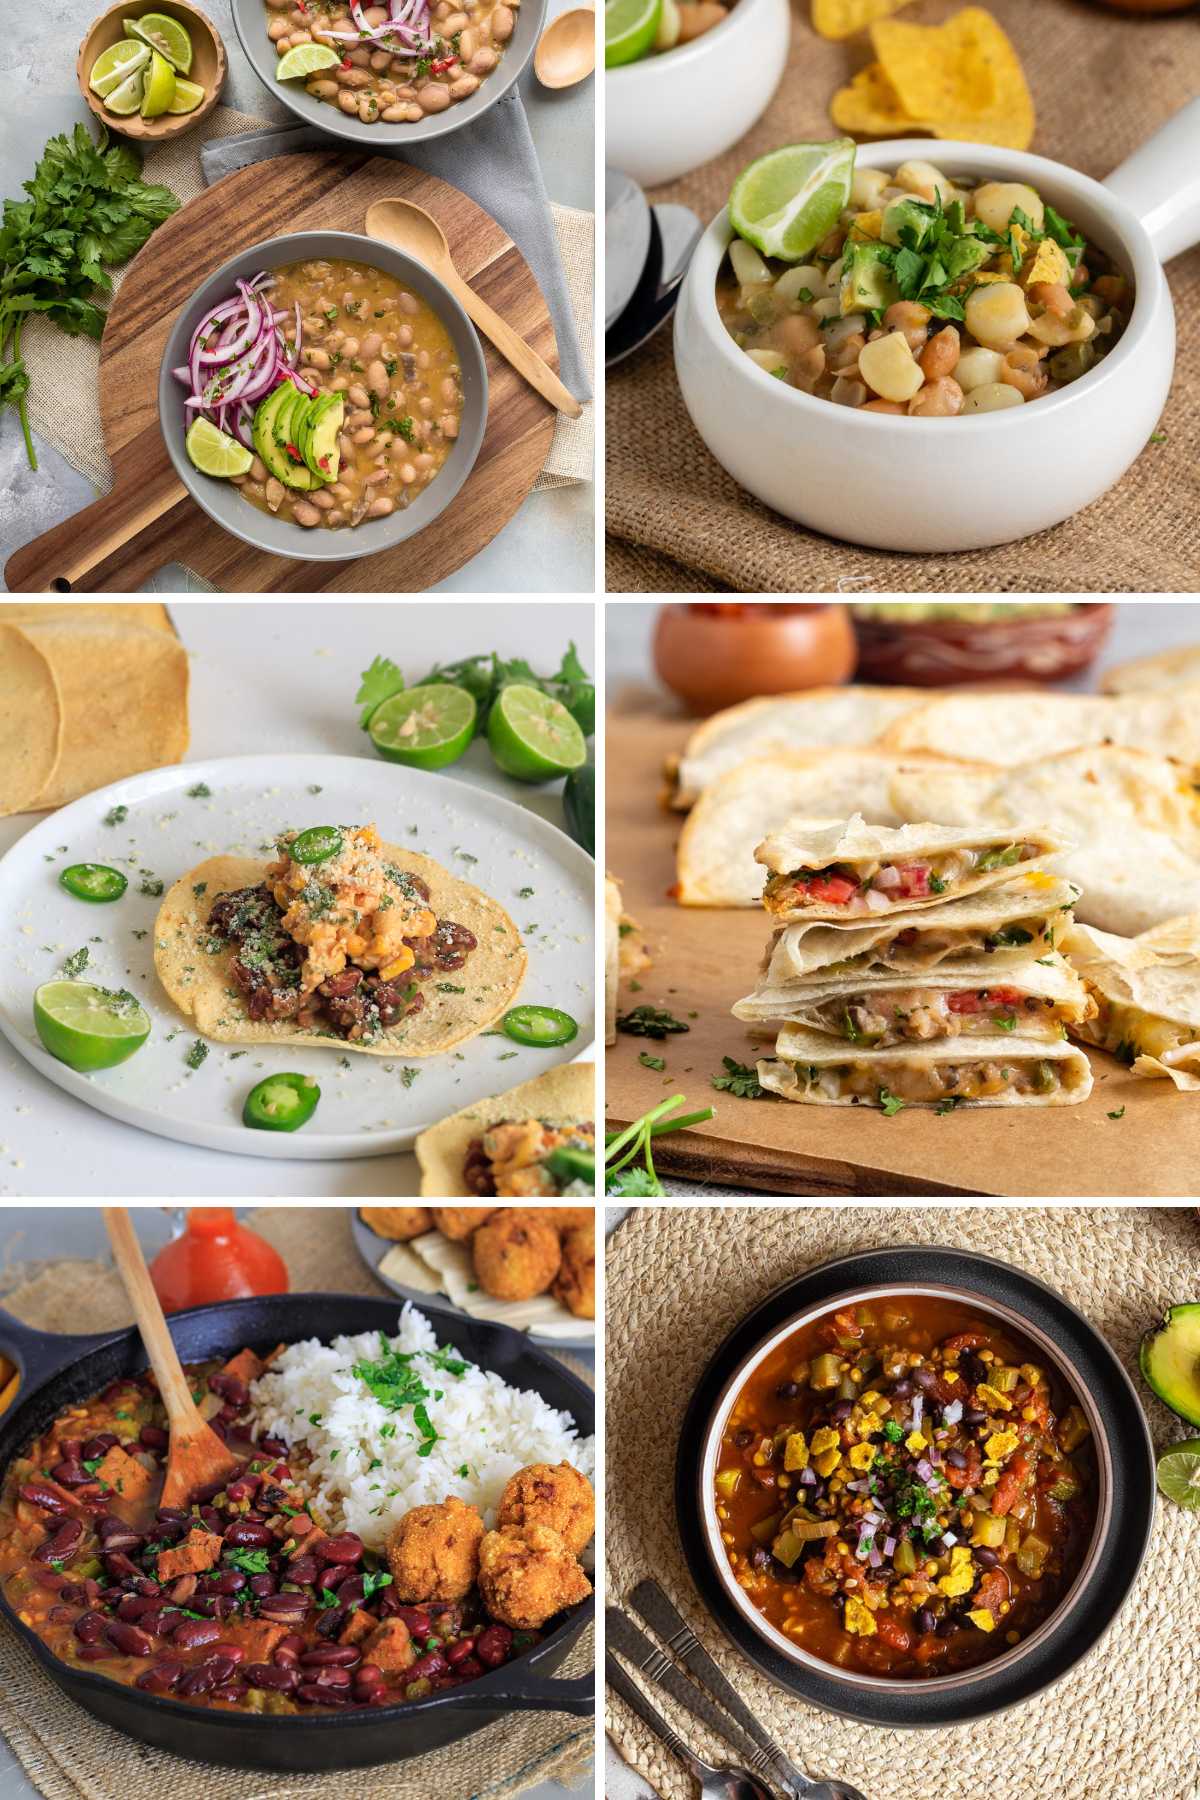 A collage of six different bean recipes including peruvian beans, chili, tostadas, quesadillas, and bowls of beans.